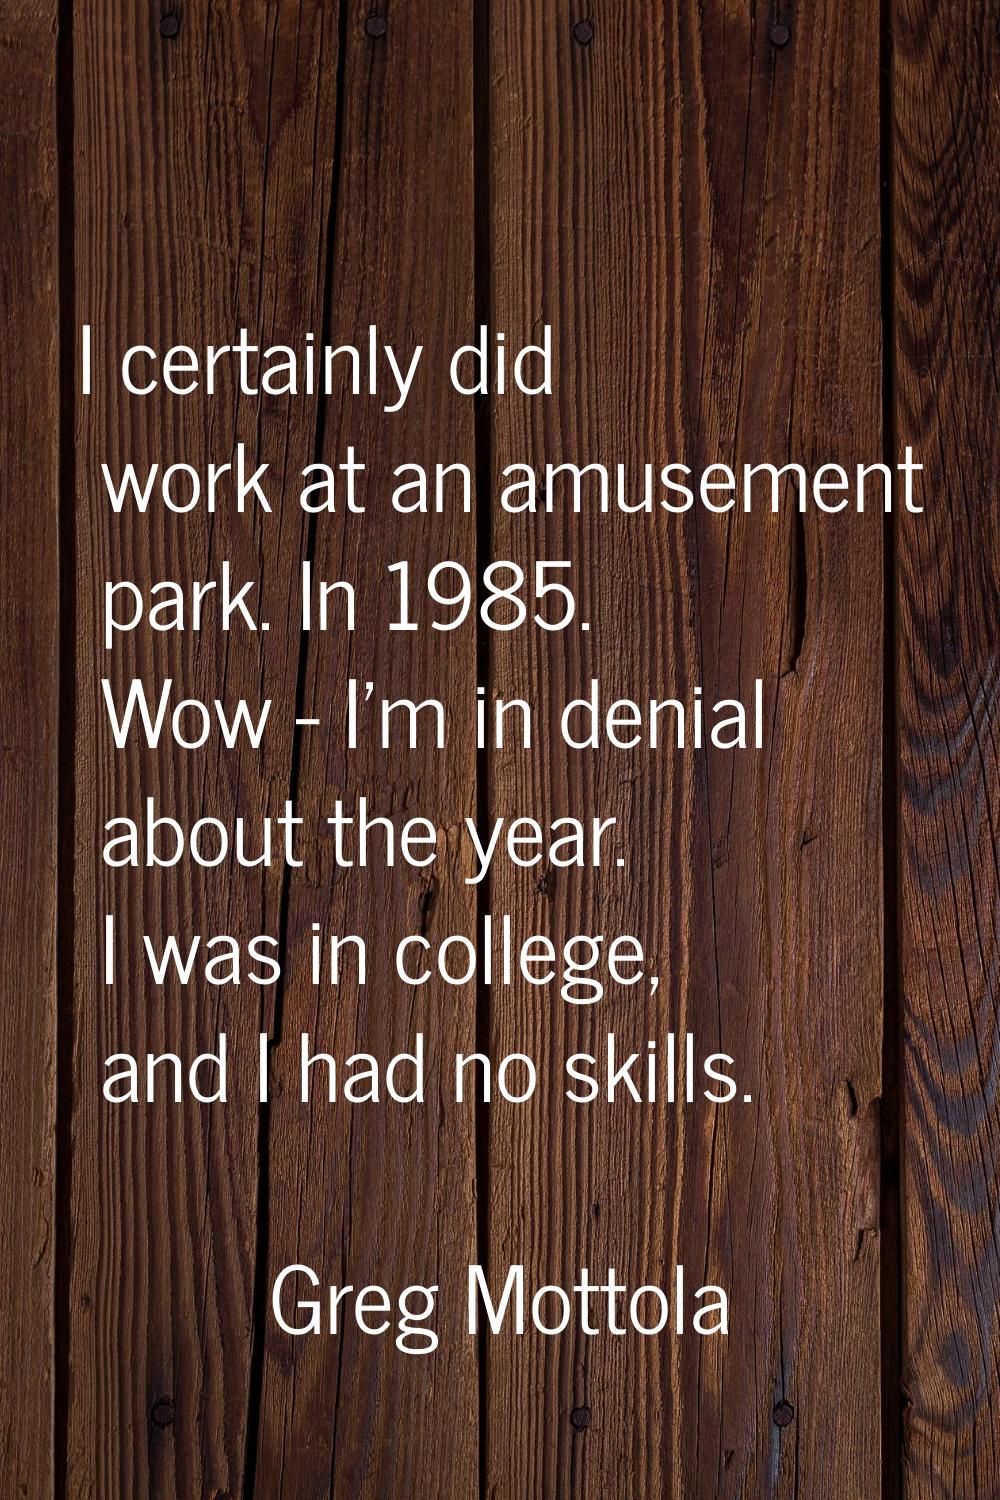 I certainly did work at an amusement park. In 1985. Wow - I'm in denial about the year. I was in co